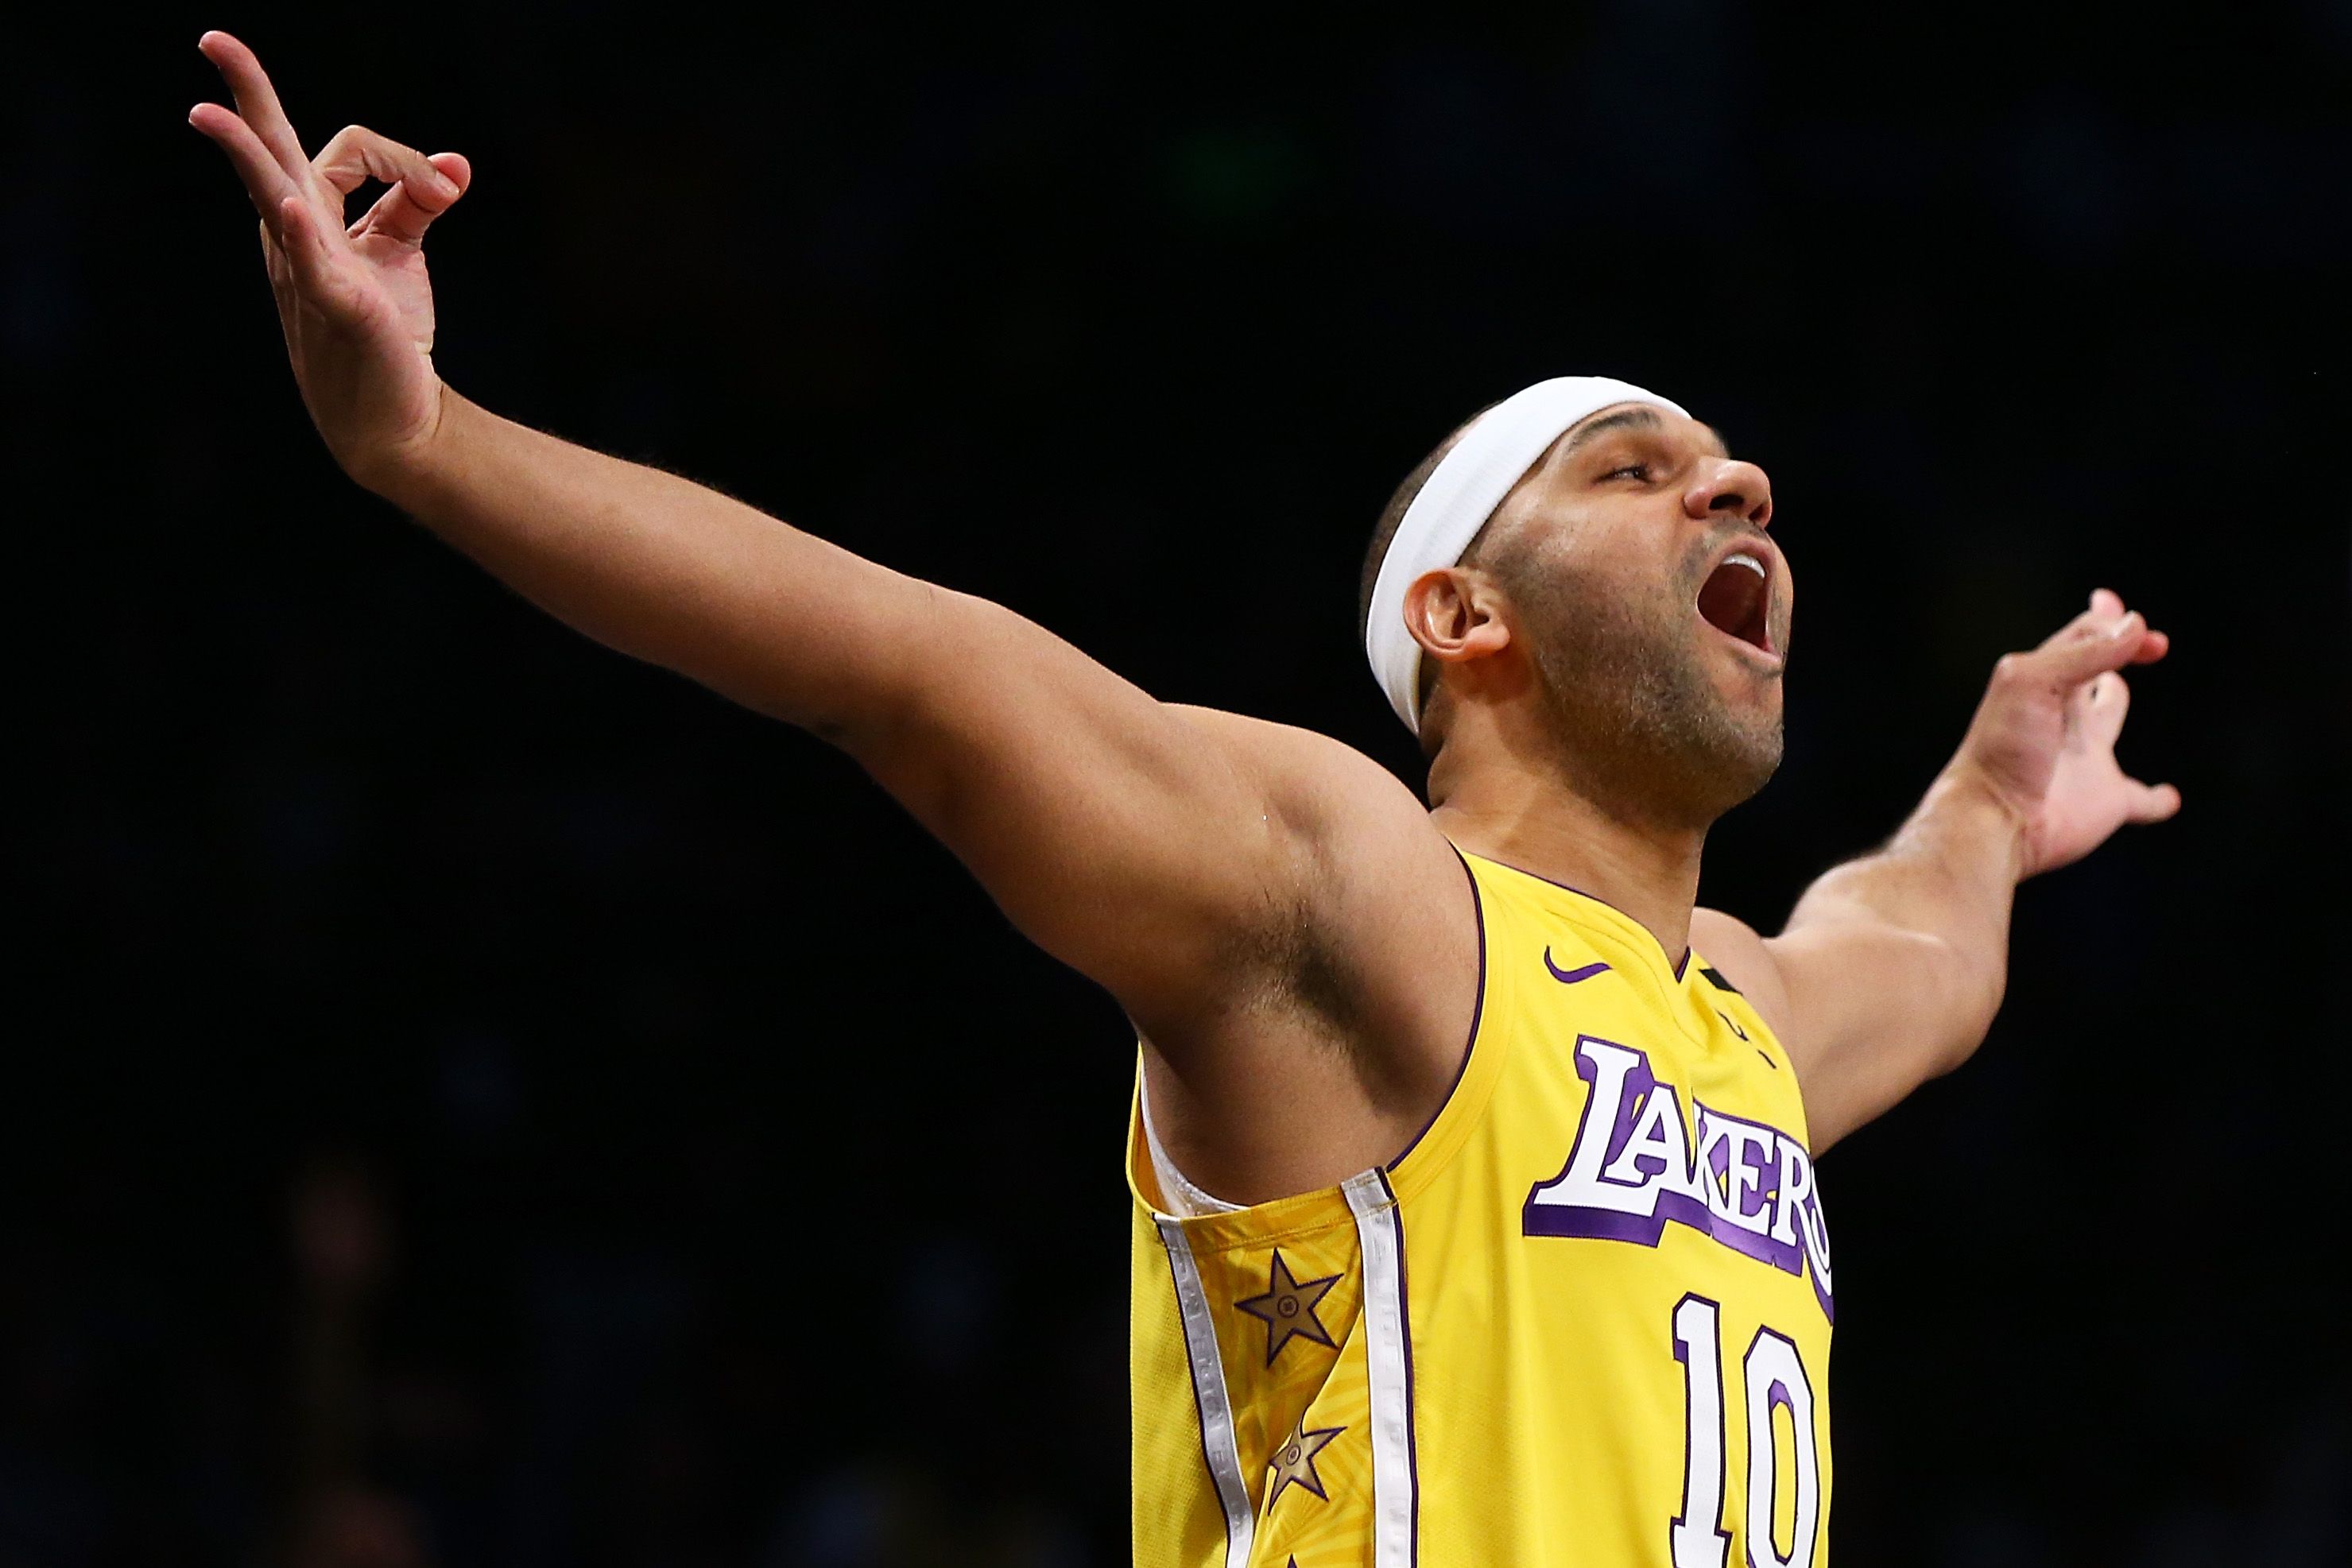 Jared Dudley screams after hitting a three-pointer